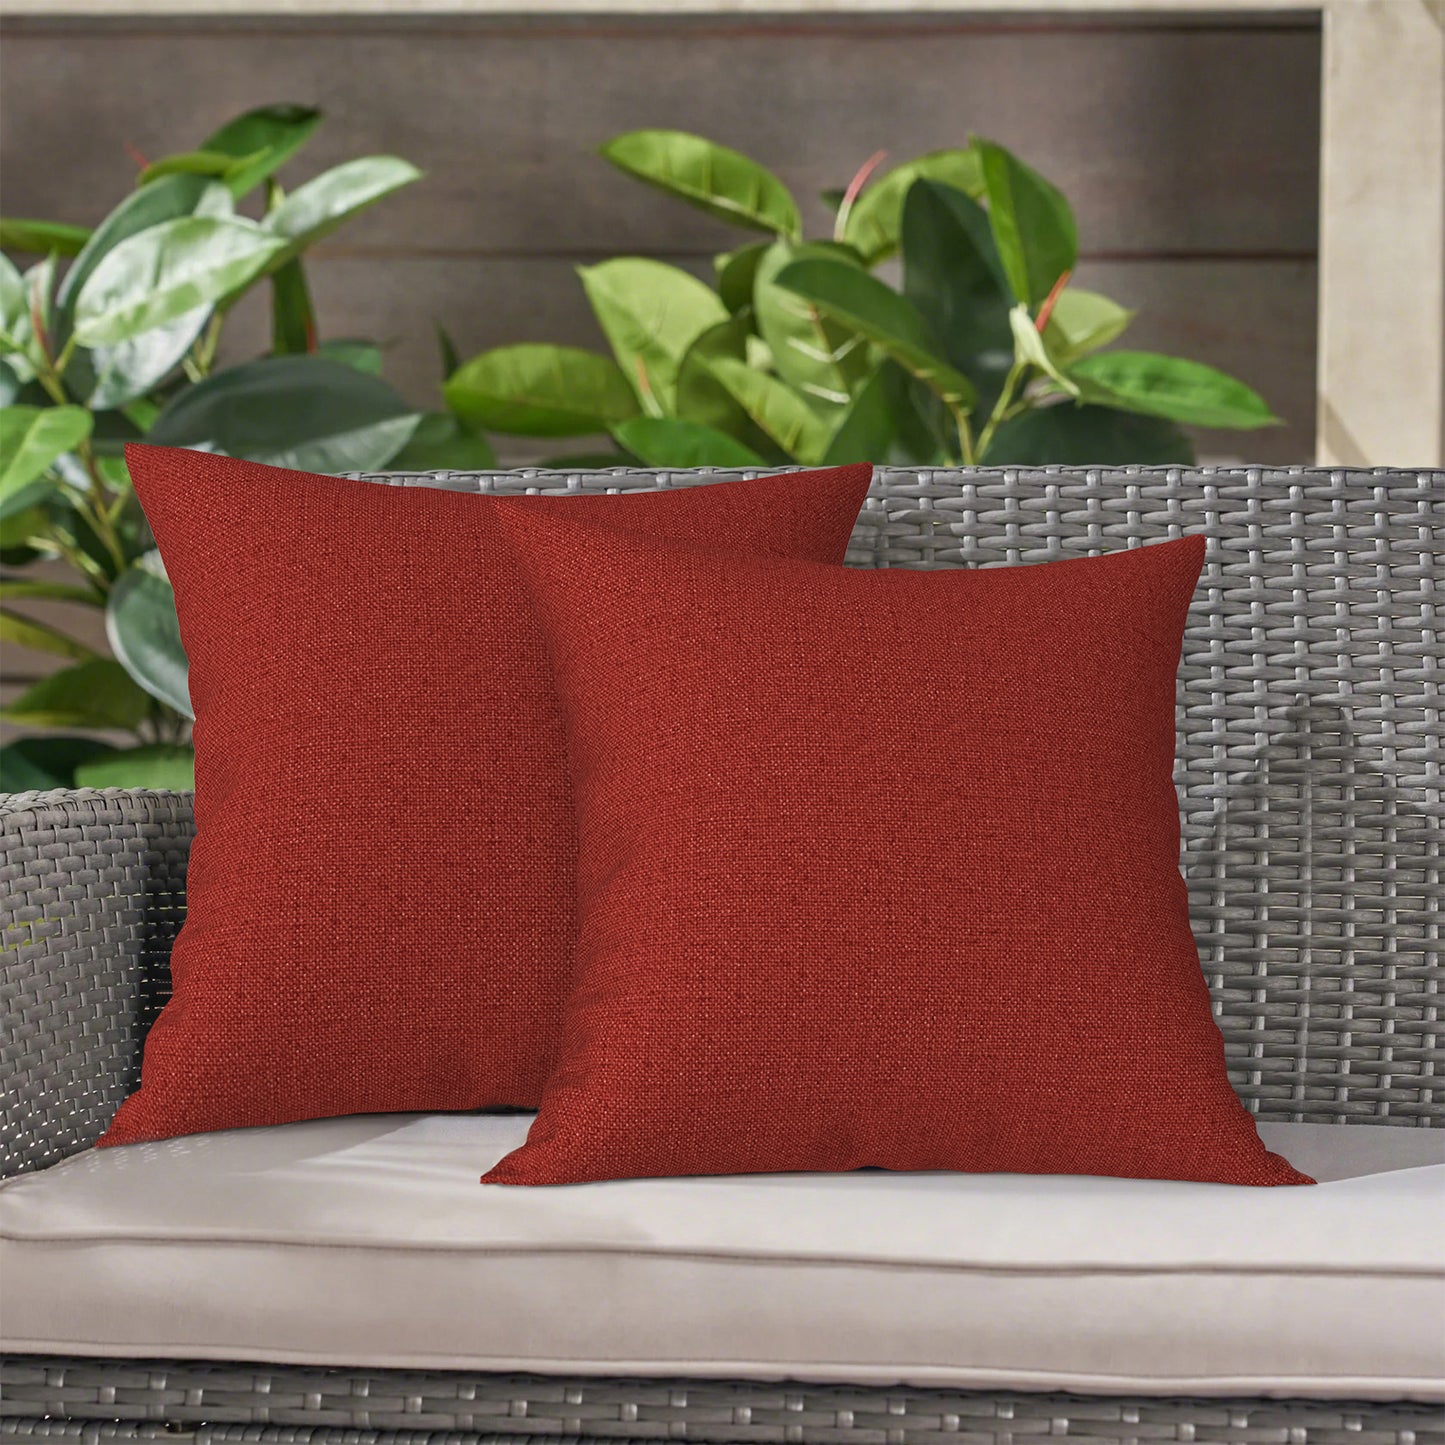 Melody Elephant Outdoor Throw Pillow Covers Pack of 2, Decorative Water Repellent Square Pillow Cases 18x18 Inch, Patio Pillowcases for Home Patio Furniture Use, Brick Red